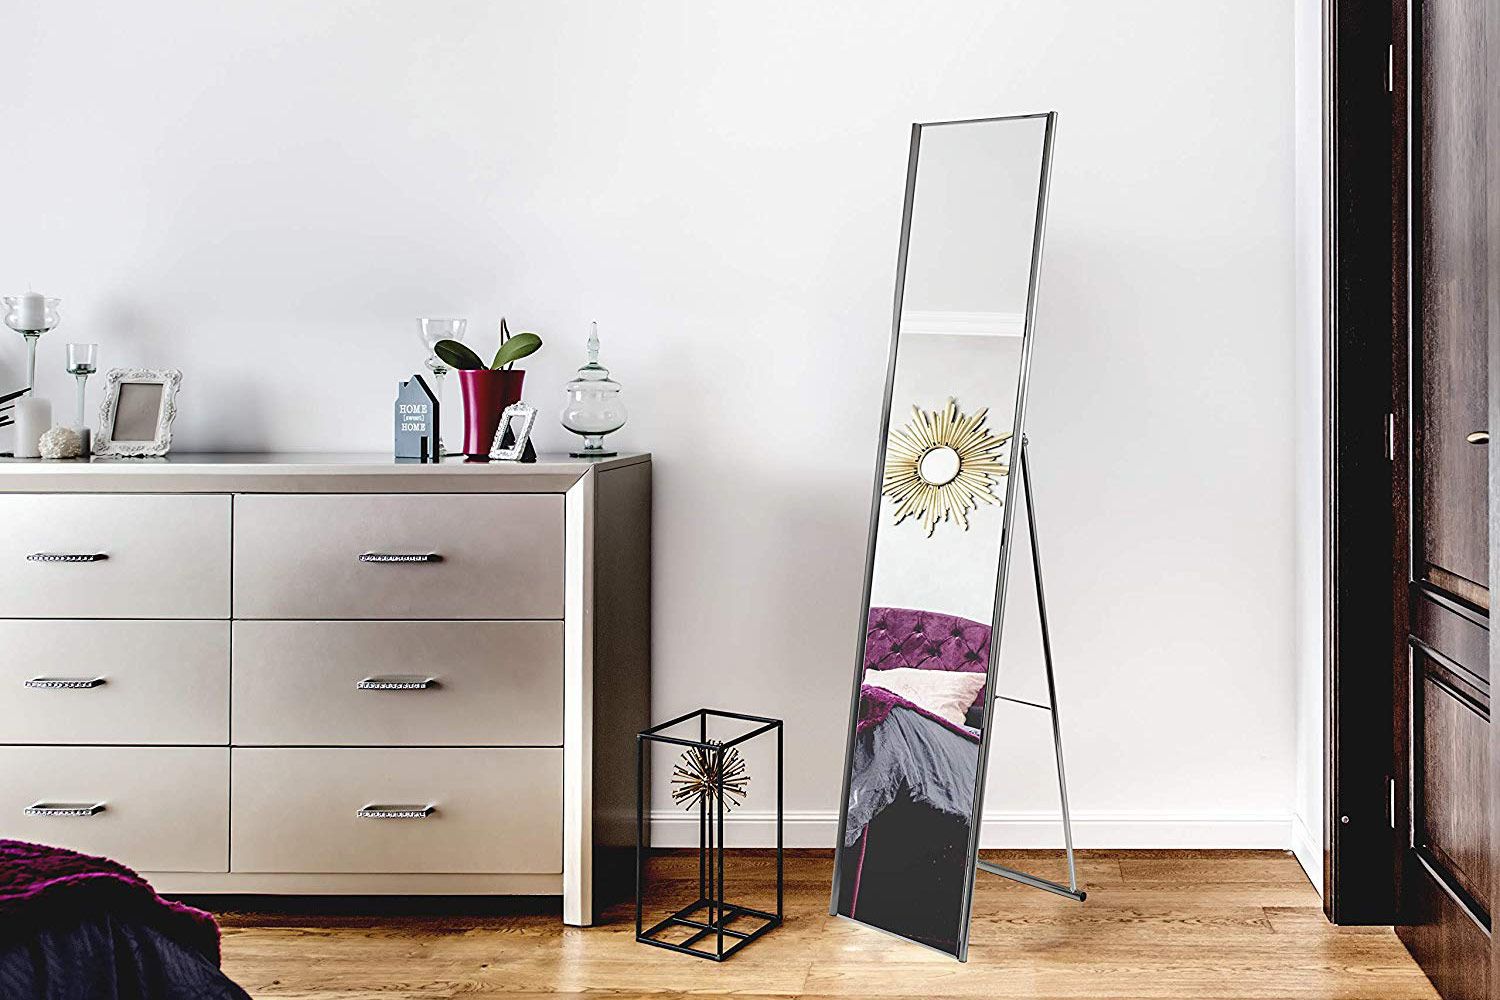 8 Best Full Length Mirrors To 2019, Freestanding Floor Mirror With Storage